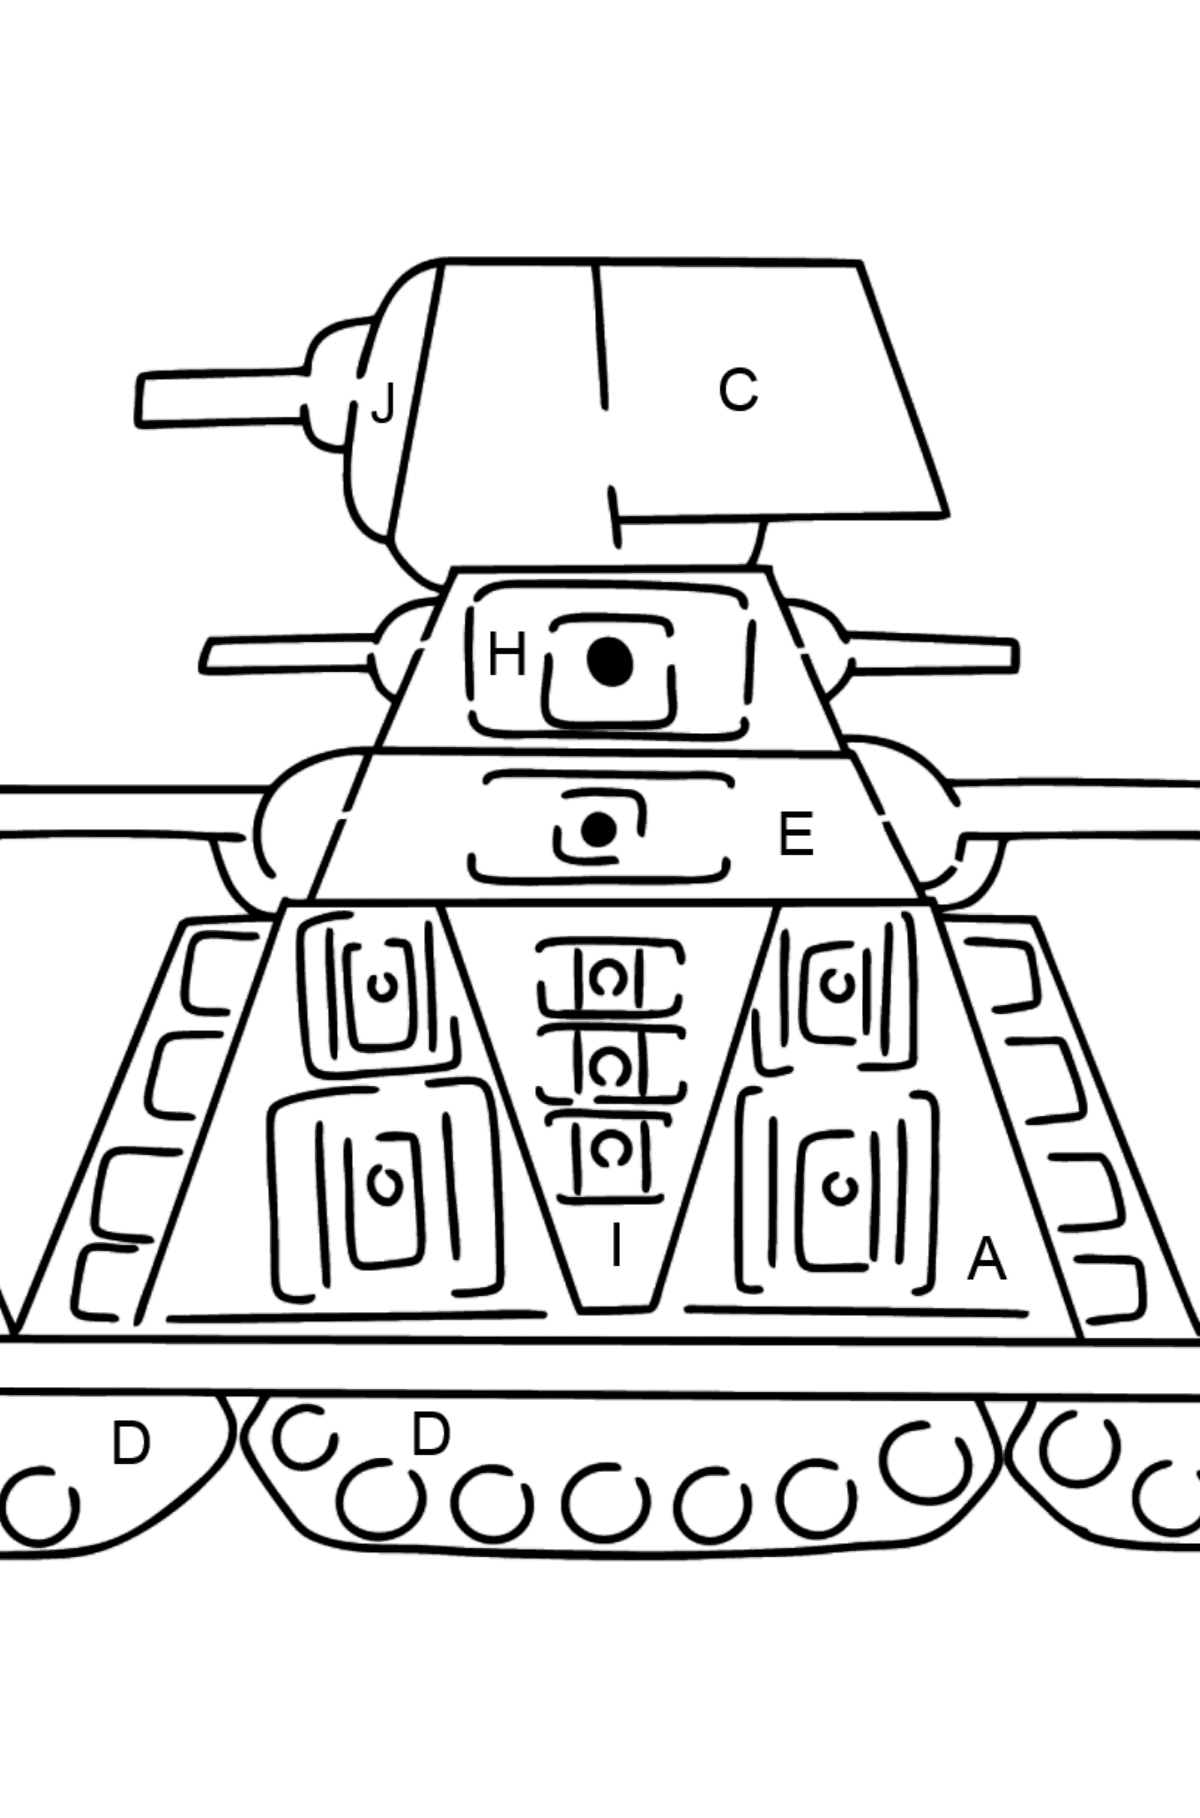 Tank KV 44 coloring page - Coloring by Letters for Kids